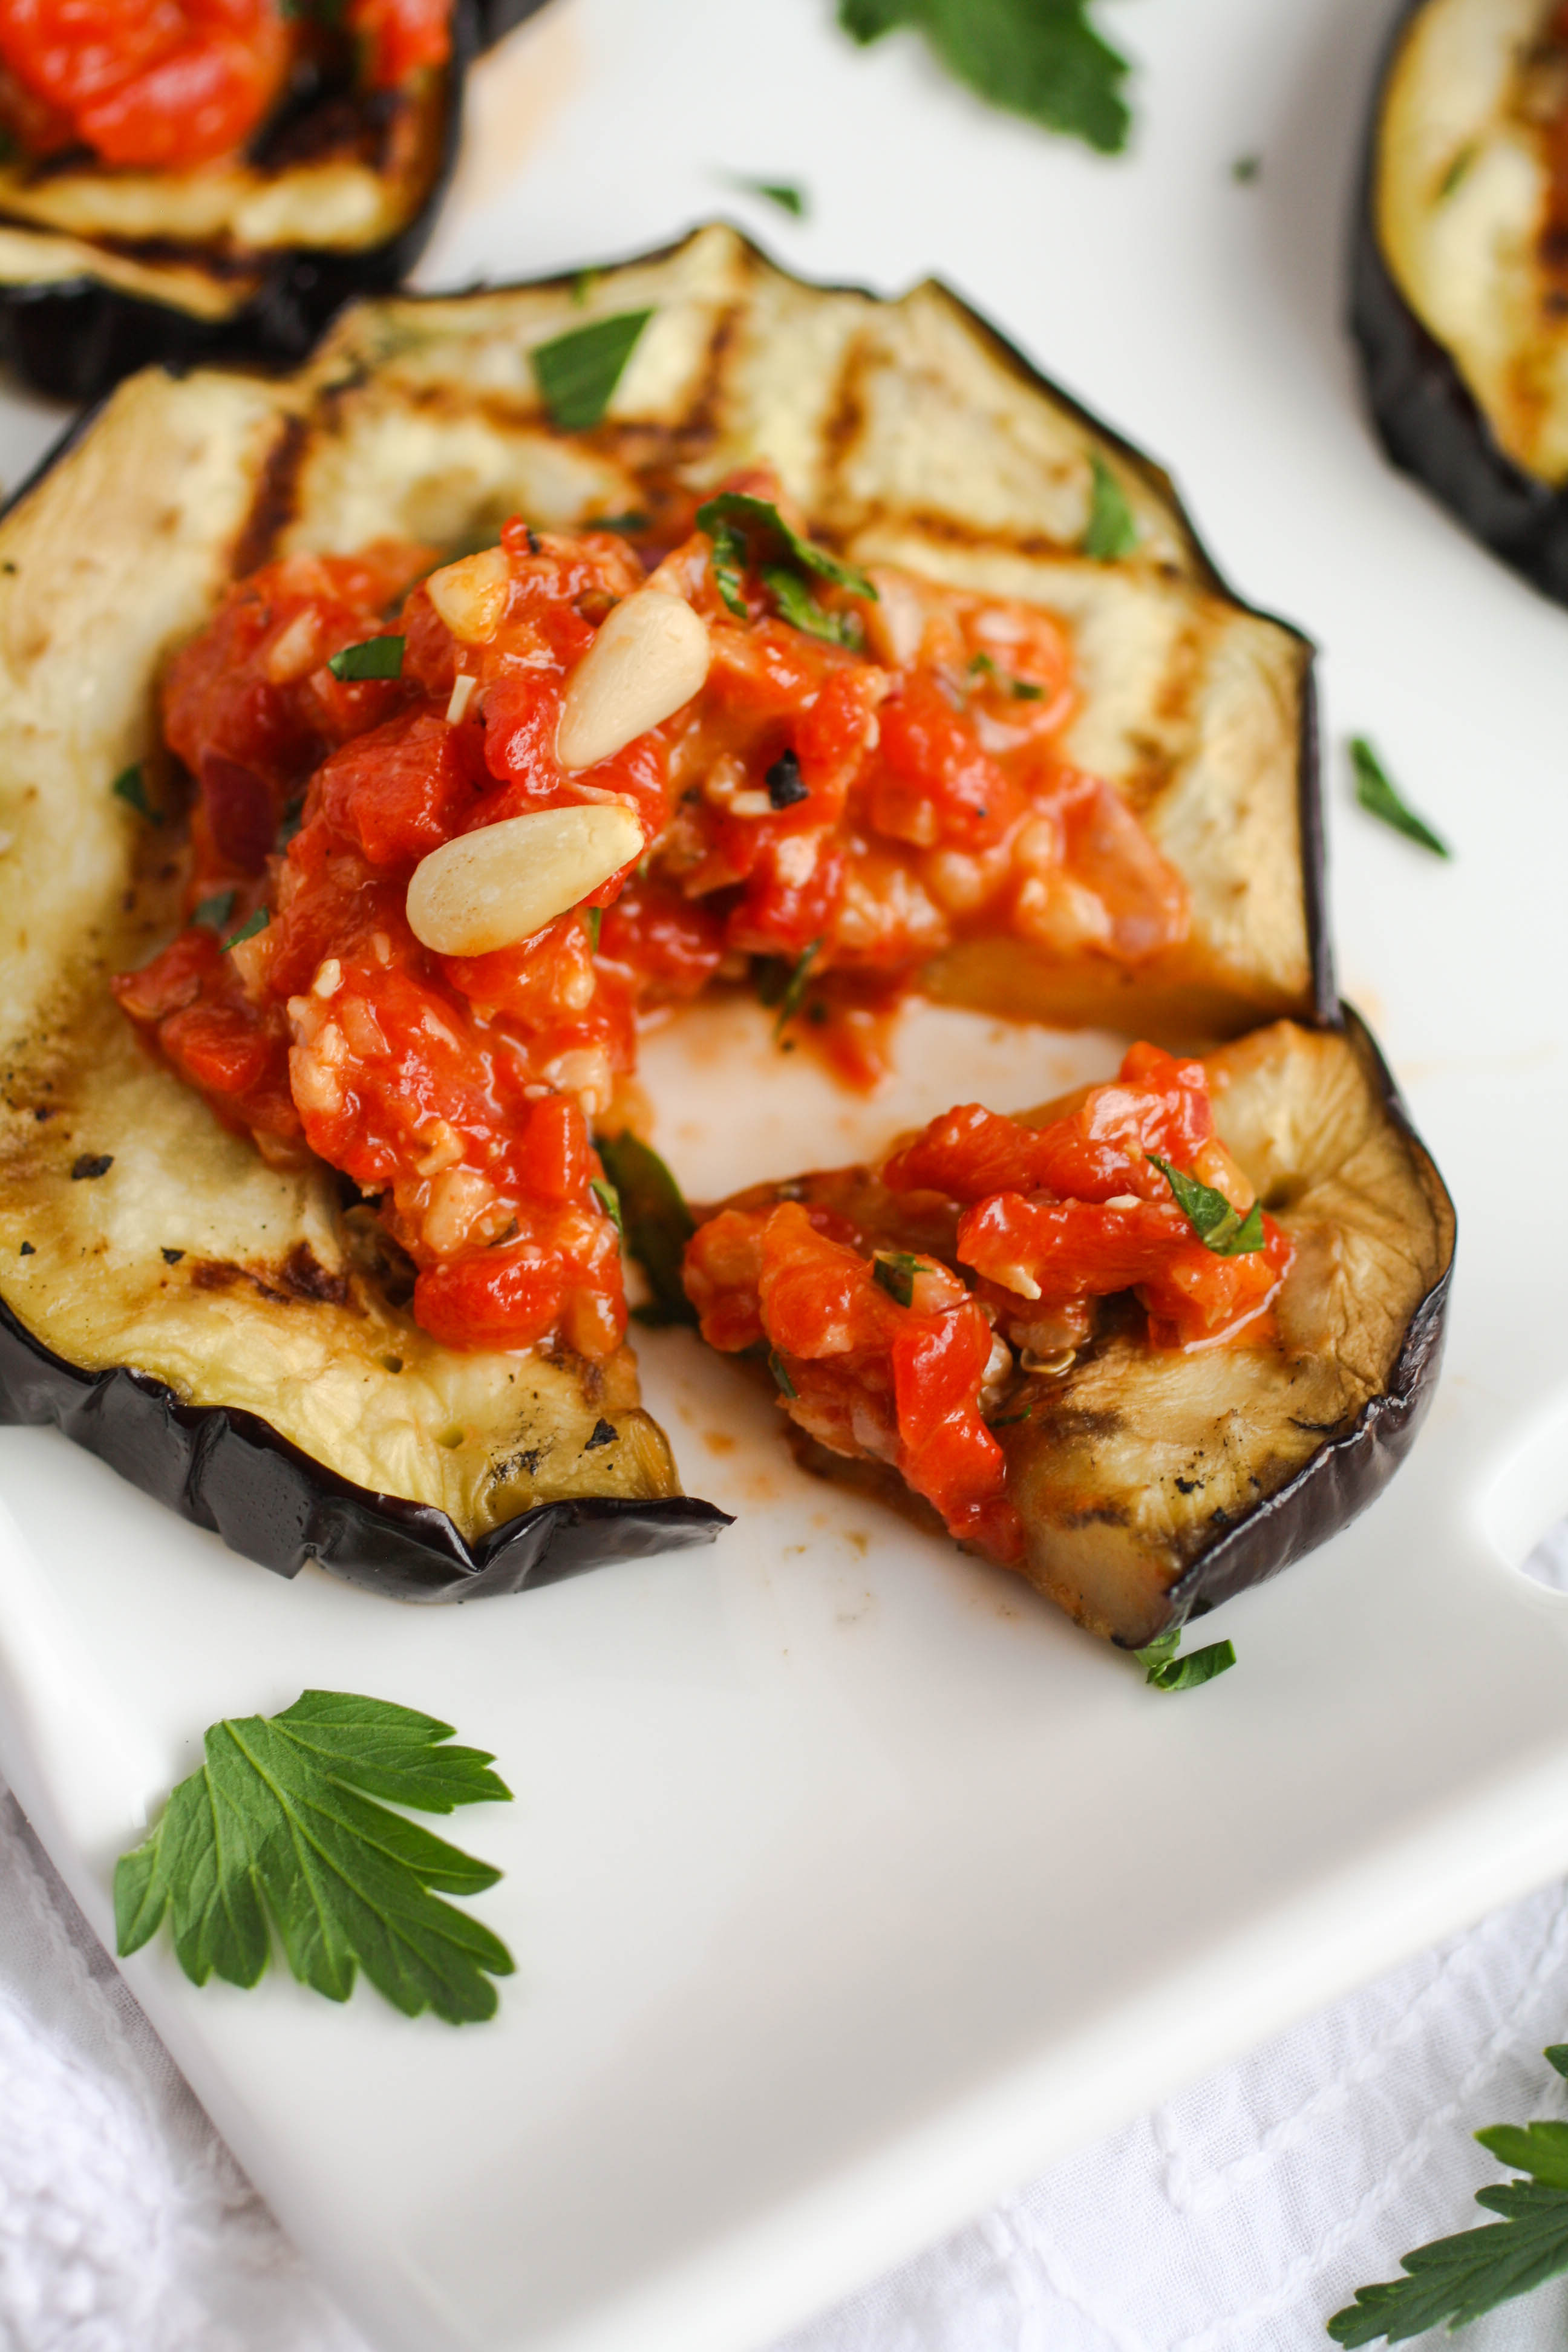 Grilled Eggplant with Roasted Red Pepper Tapenade